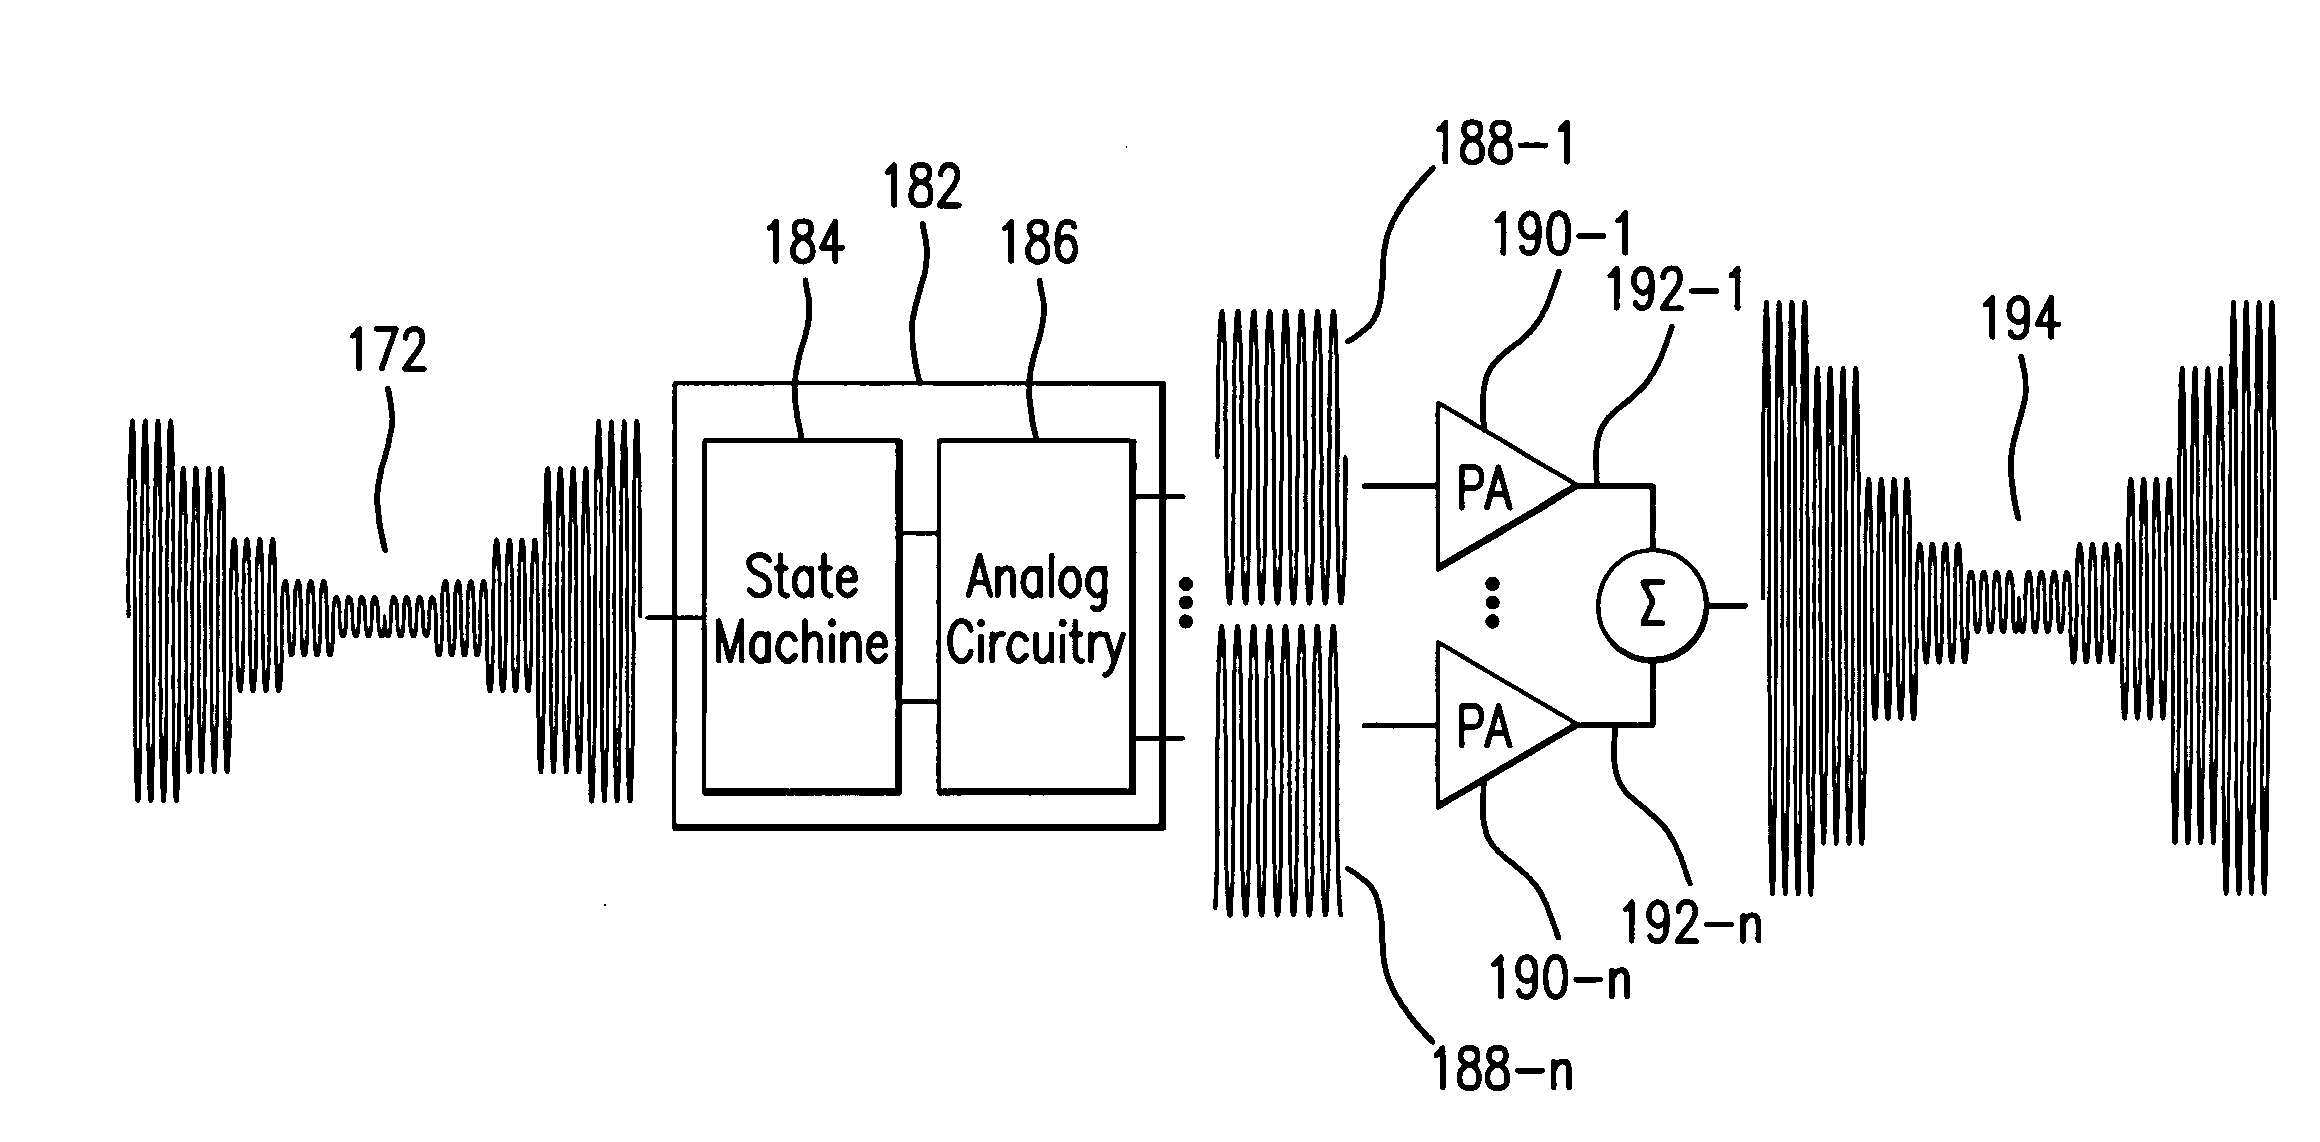 Systems and methods of RF tower transmission, modulation, and amplification, including embodiments for compensating for waveform distortion